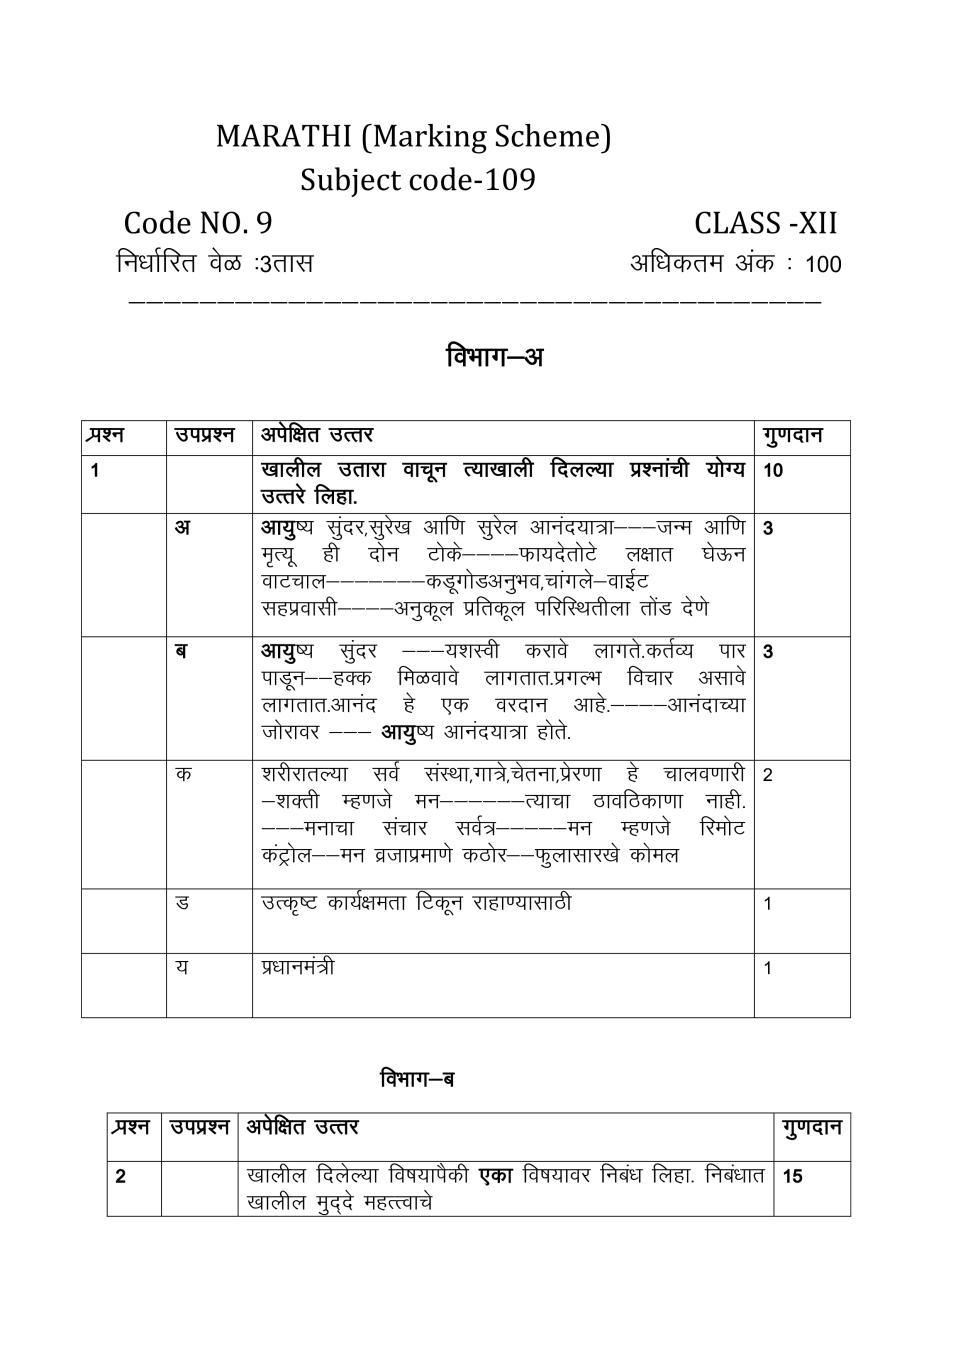 CBSE Class 12 Marathi Question Paper 2019 Solutions - Page 1